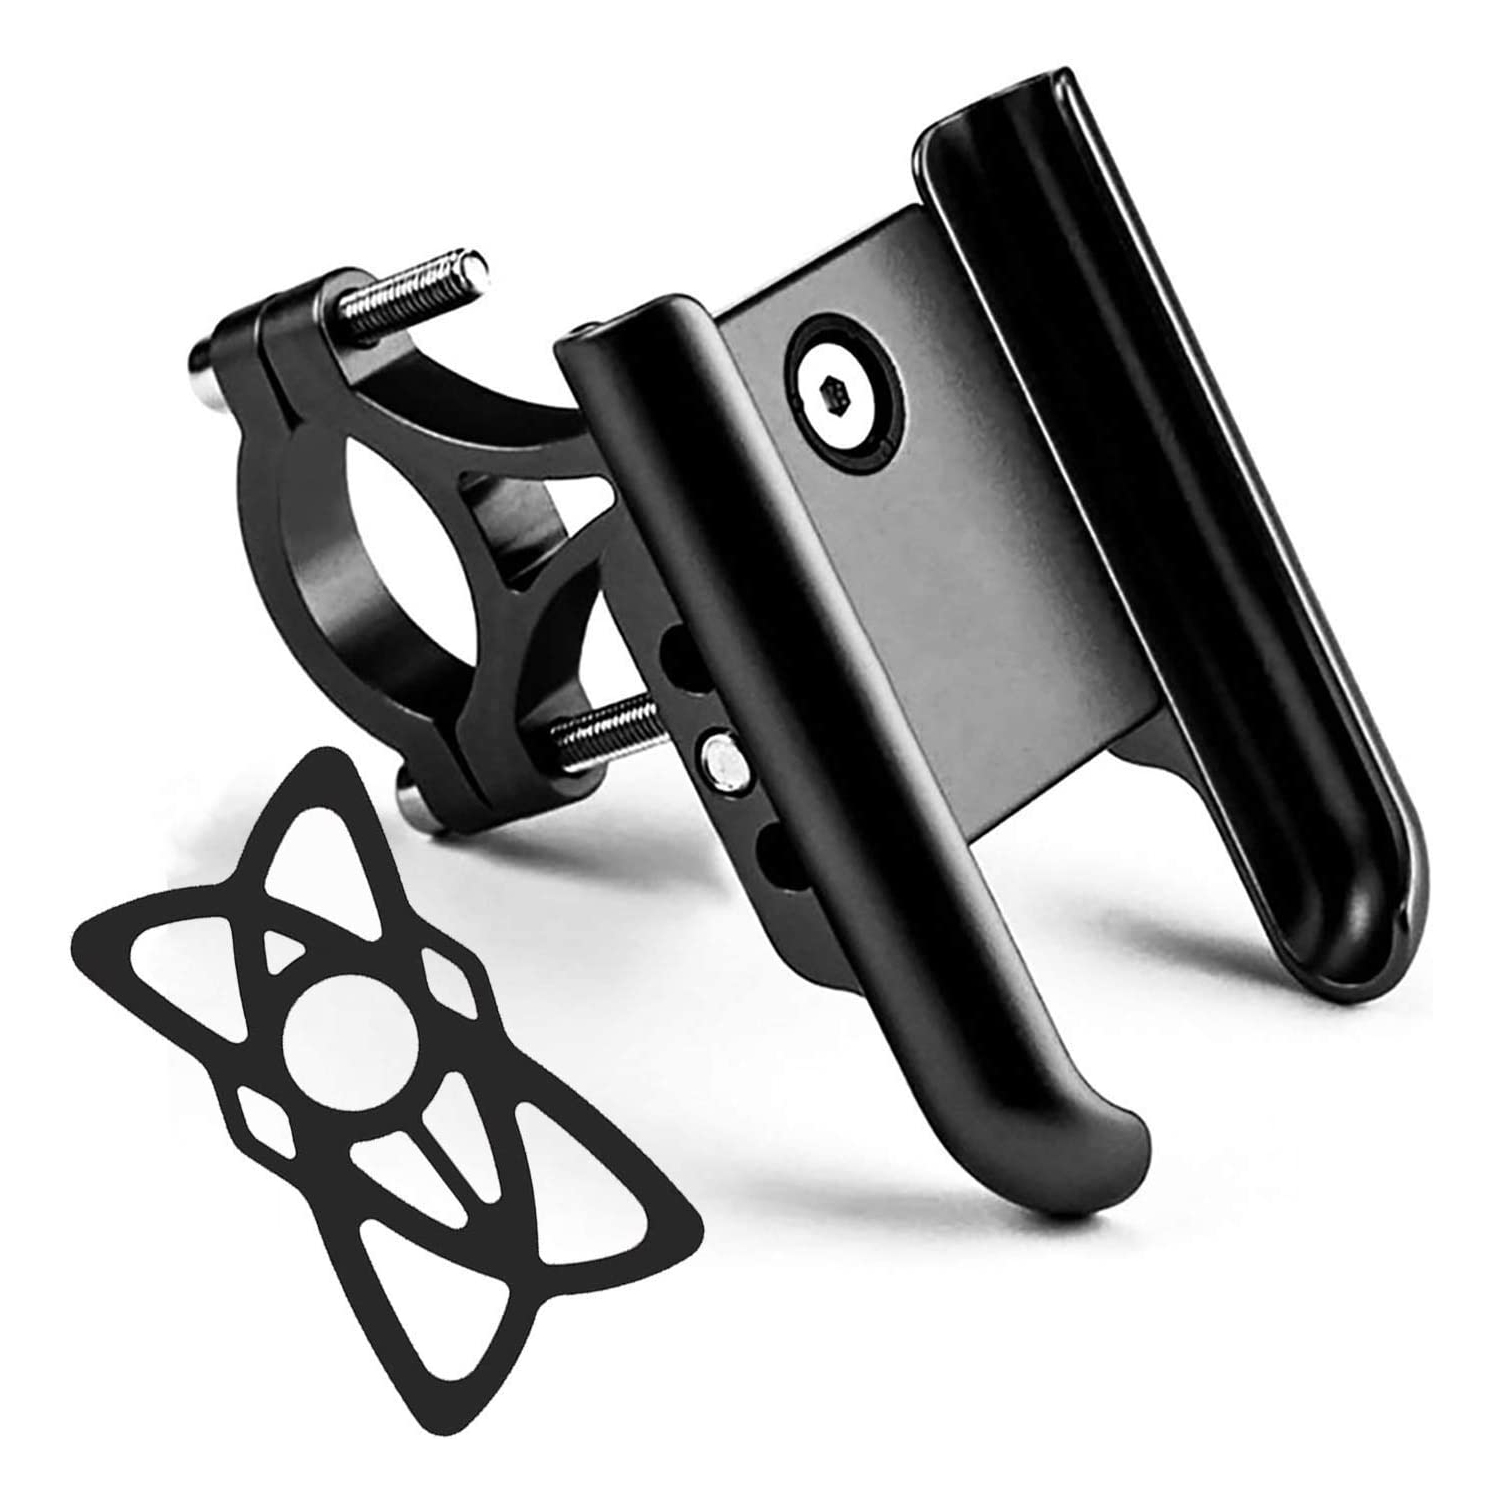 All Aluminium Bike/ Motorcycle Phone Holder Handlebar Phone Mount 360 Rotatable Compatible with 3.5-7.2 Inch Cellphones (Black)